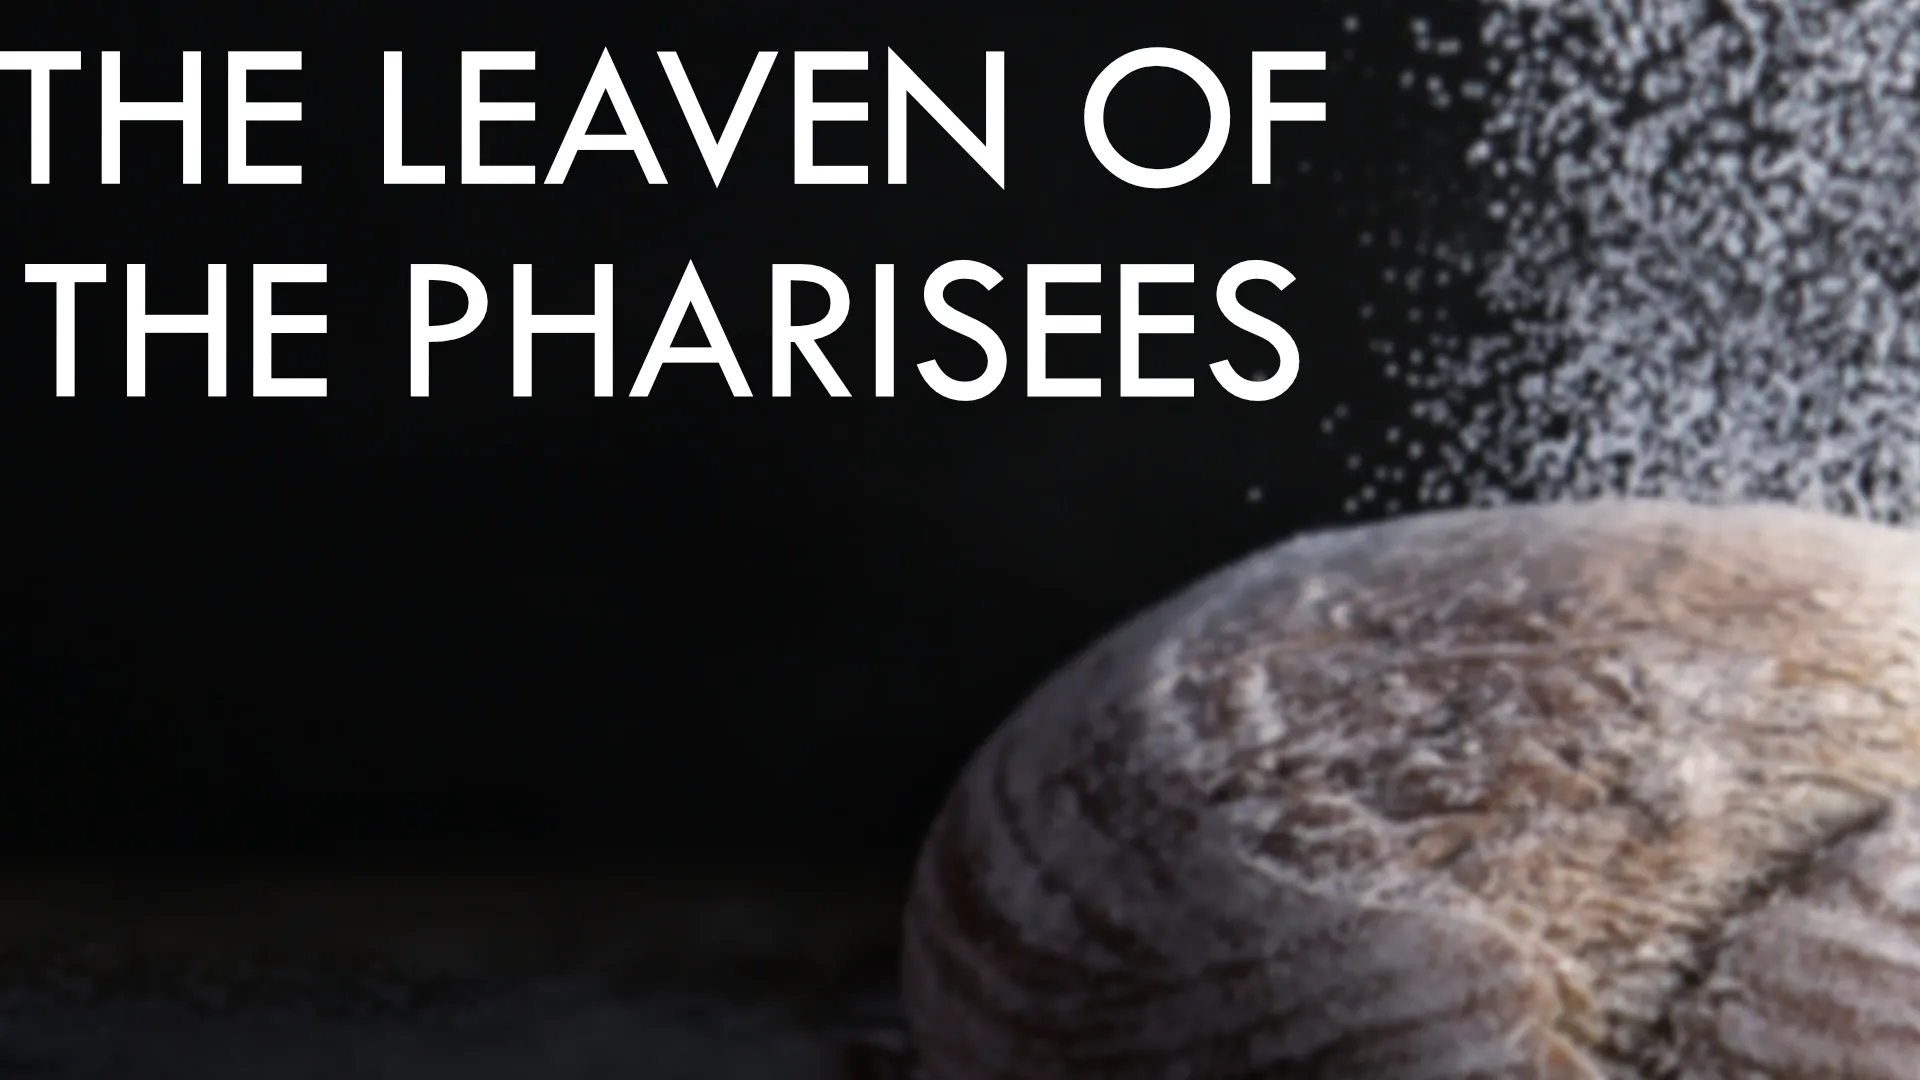 The Leaven of the Pharisees